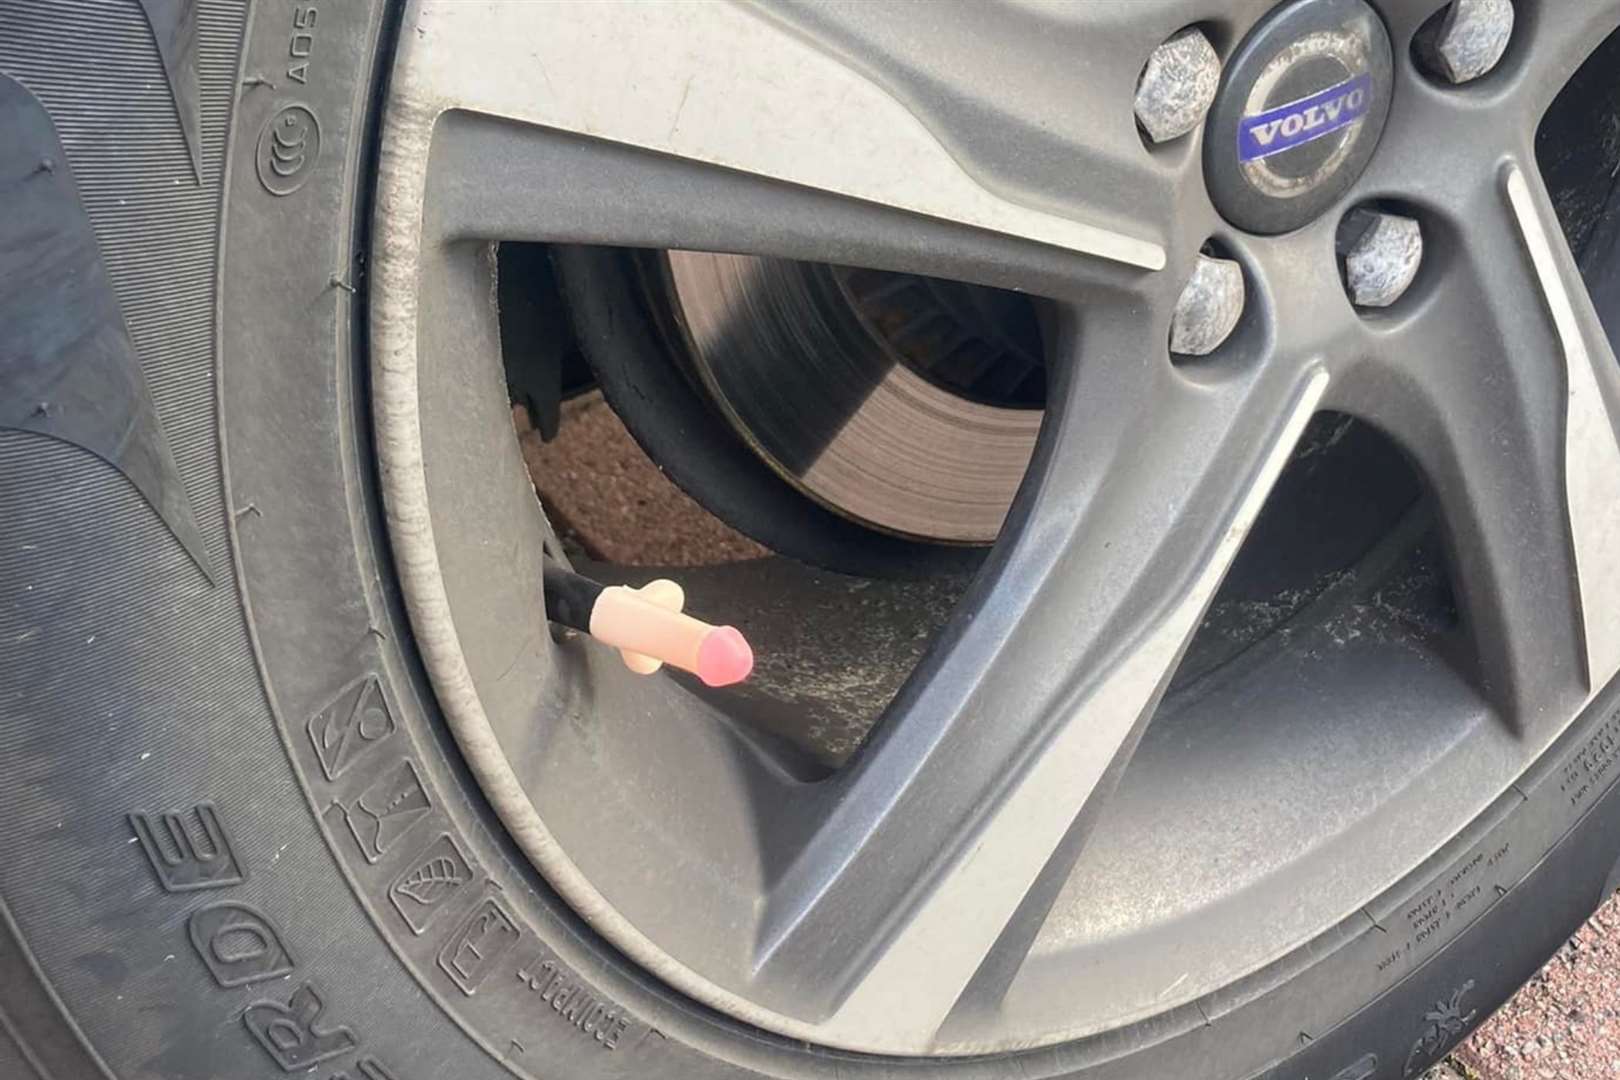 Michelle Riley found a novelty penis attached to her car